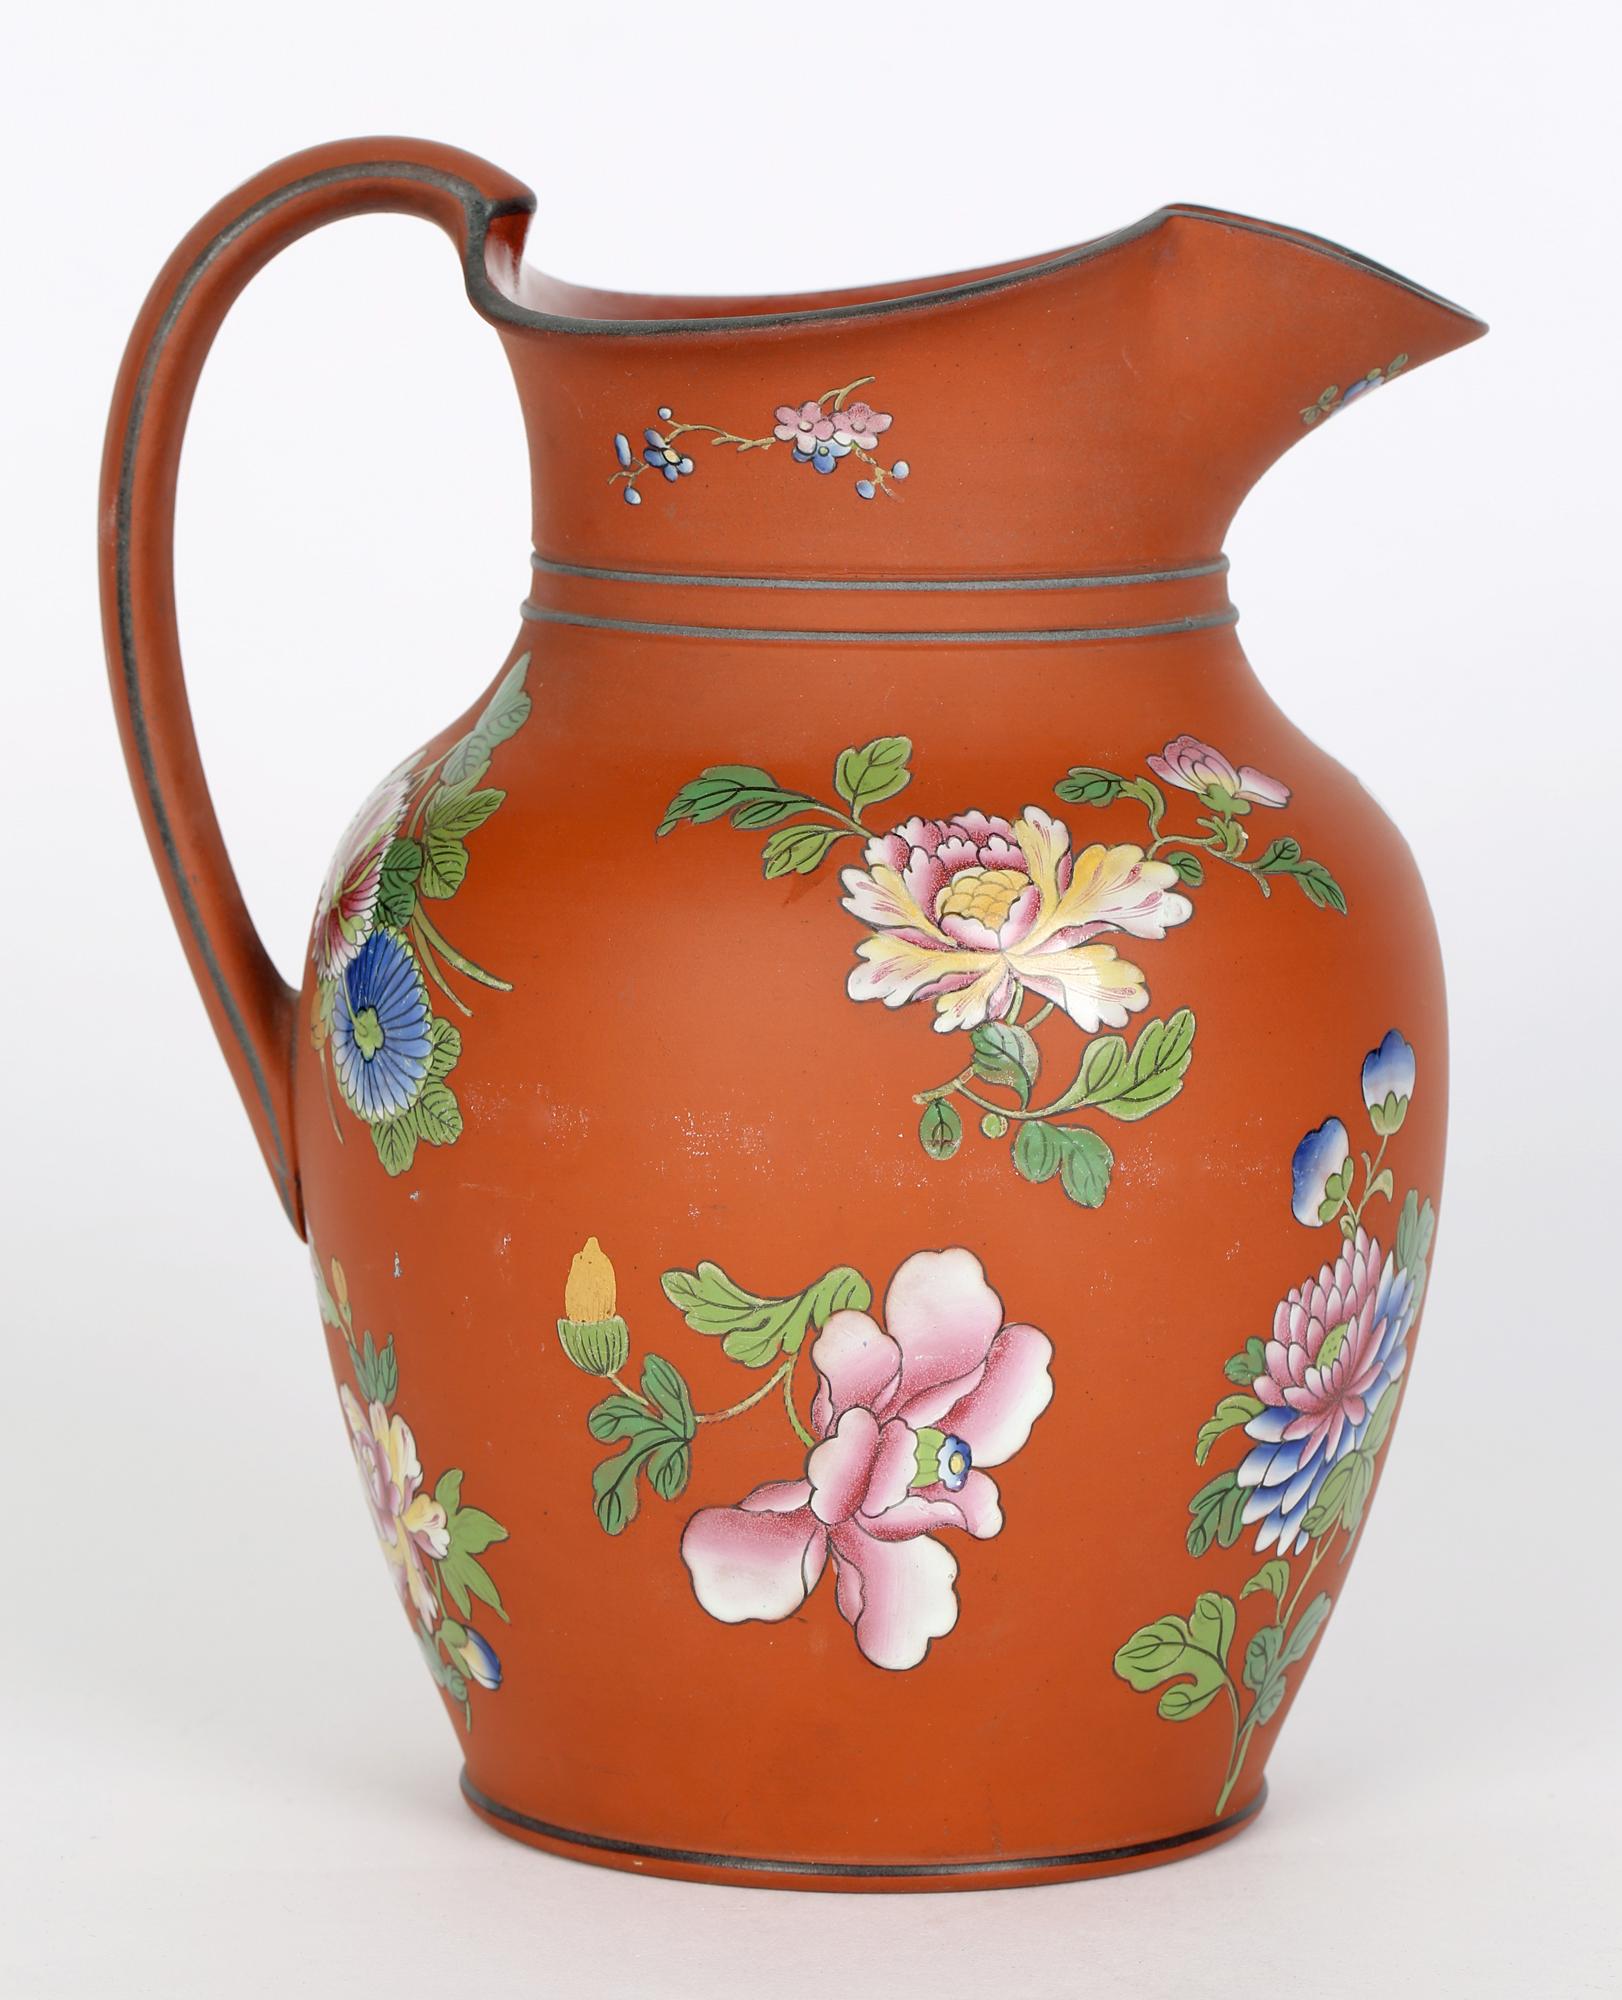 A fine Georgian English Terracotta Pottery Jug hand painted in the Rosso Antico style by Wedgwood and dating from the early 19th Century. The large jug is finely potted and is of rounded bulbous shape with a round foot rim and slightly recessed base